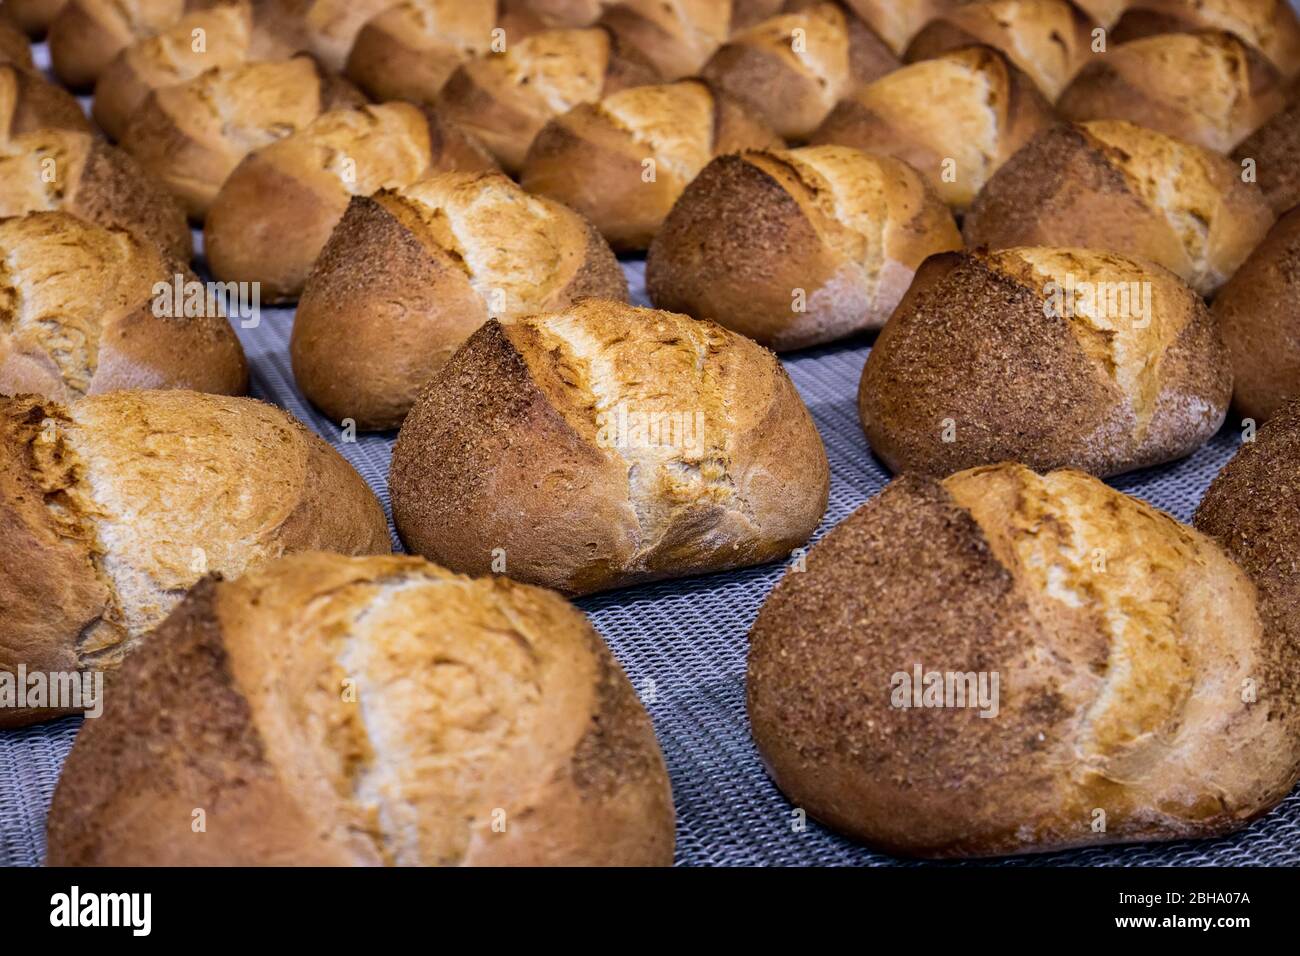 Industrial bakery line oven process of bread production Stock Photo